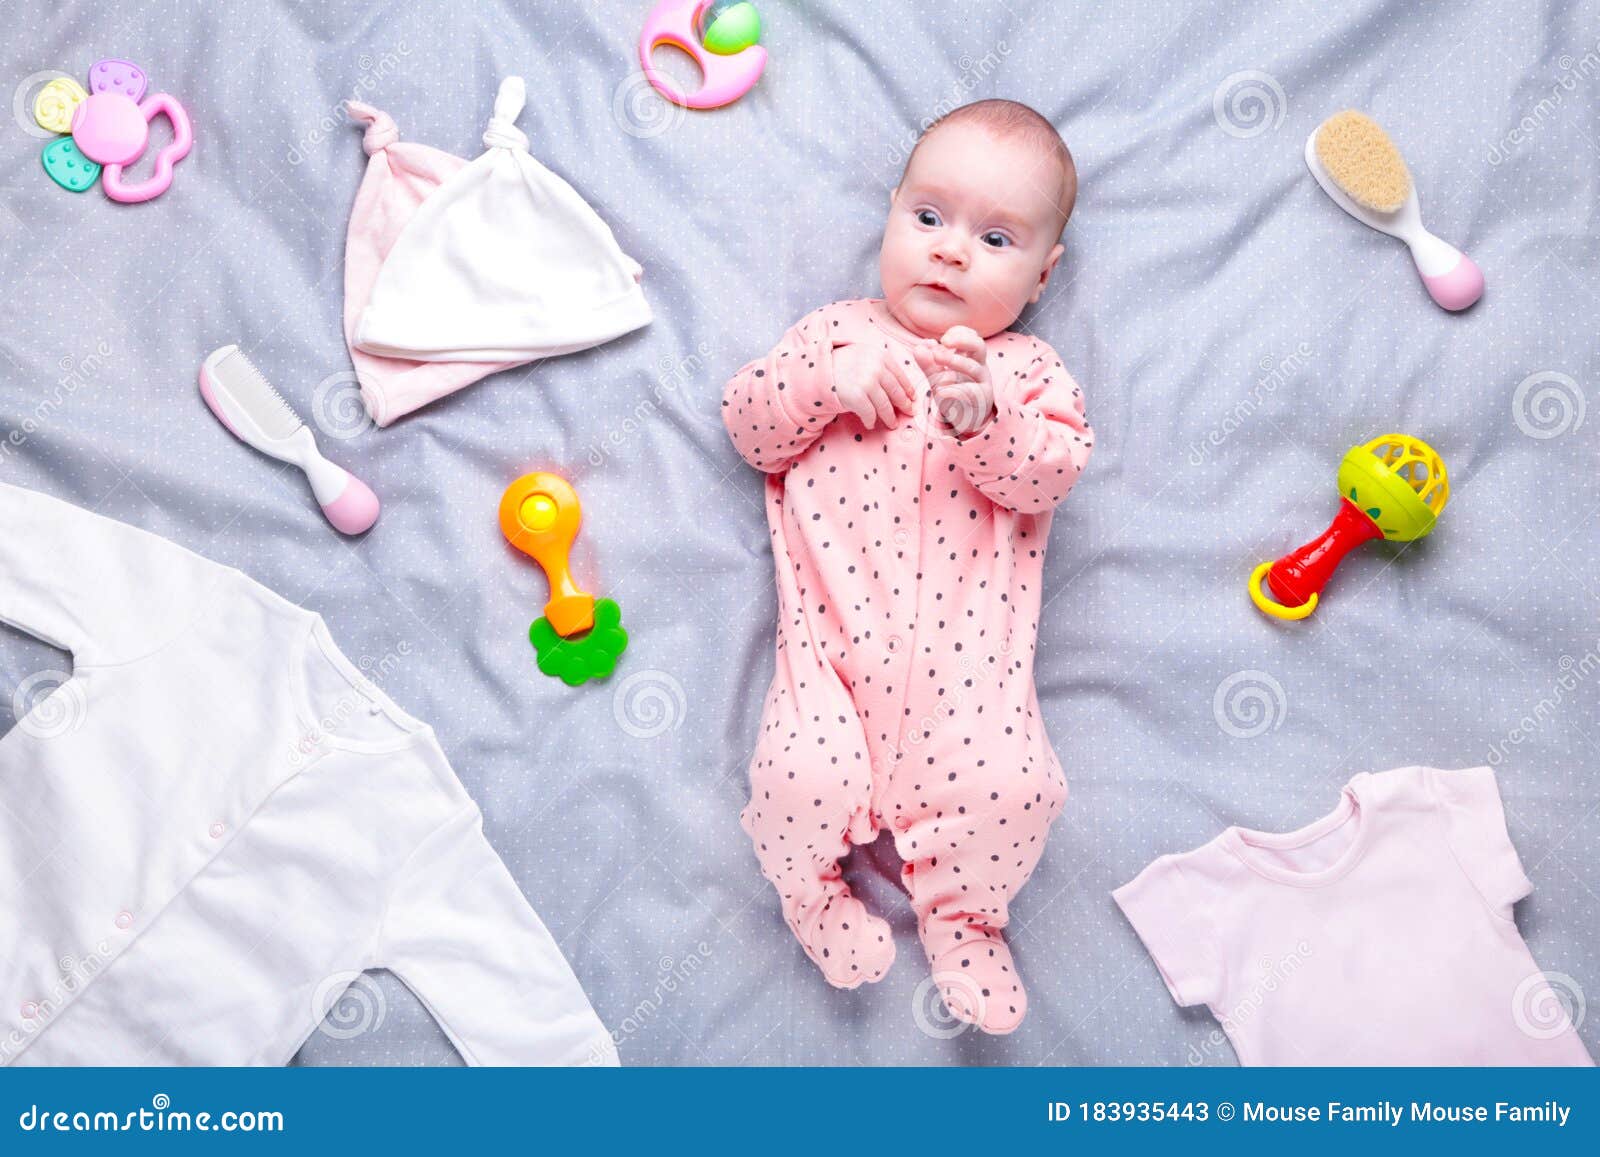 Baby on White Background with Clothing, Toiletries, Toys and Health ...